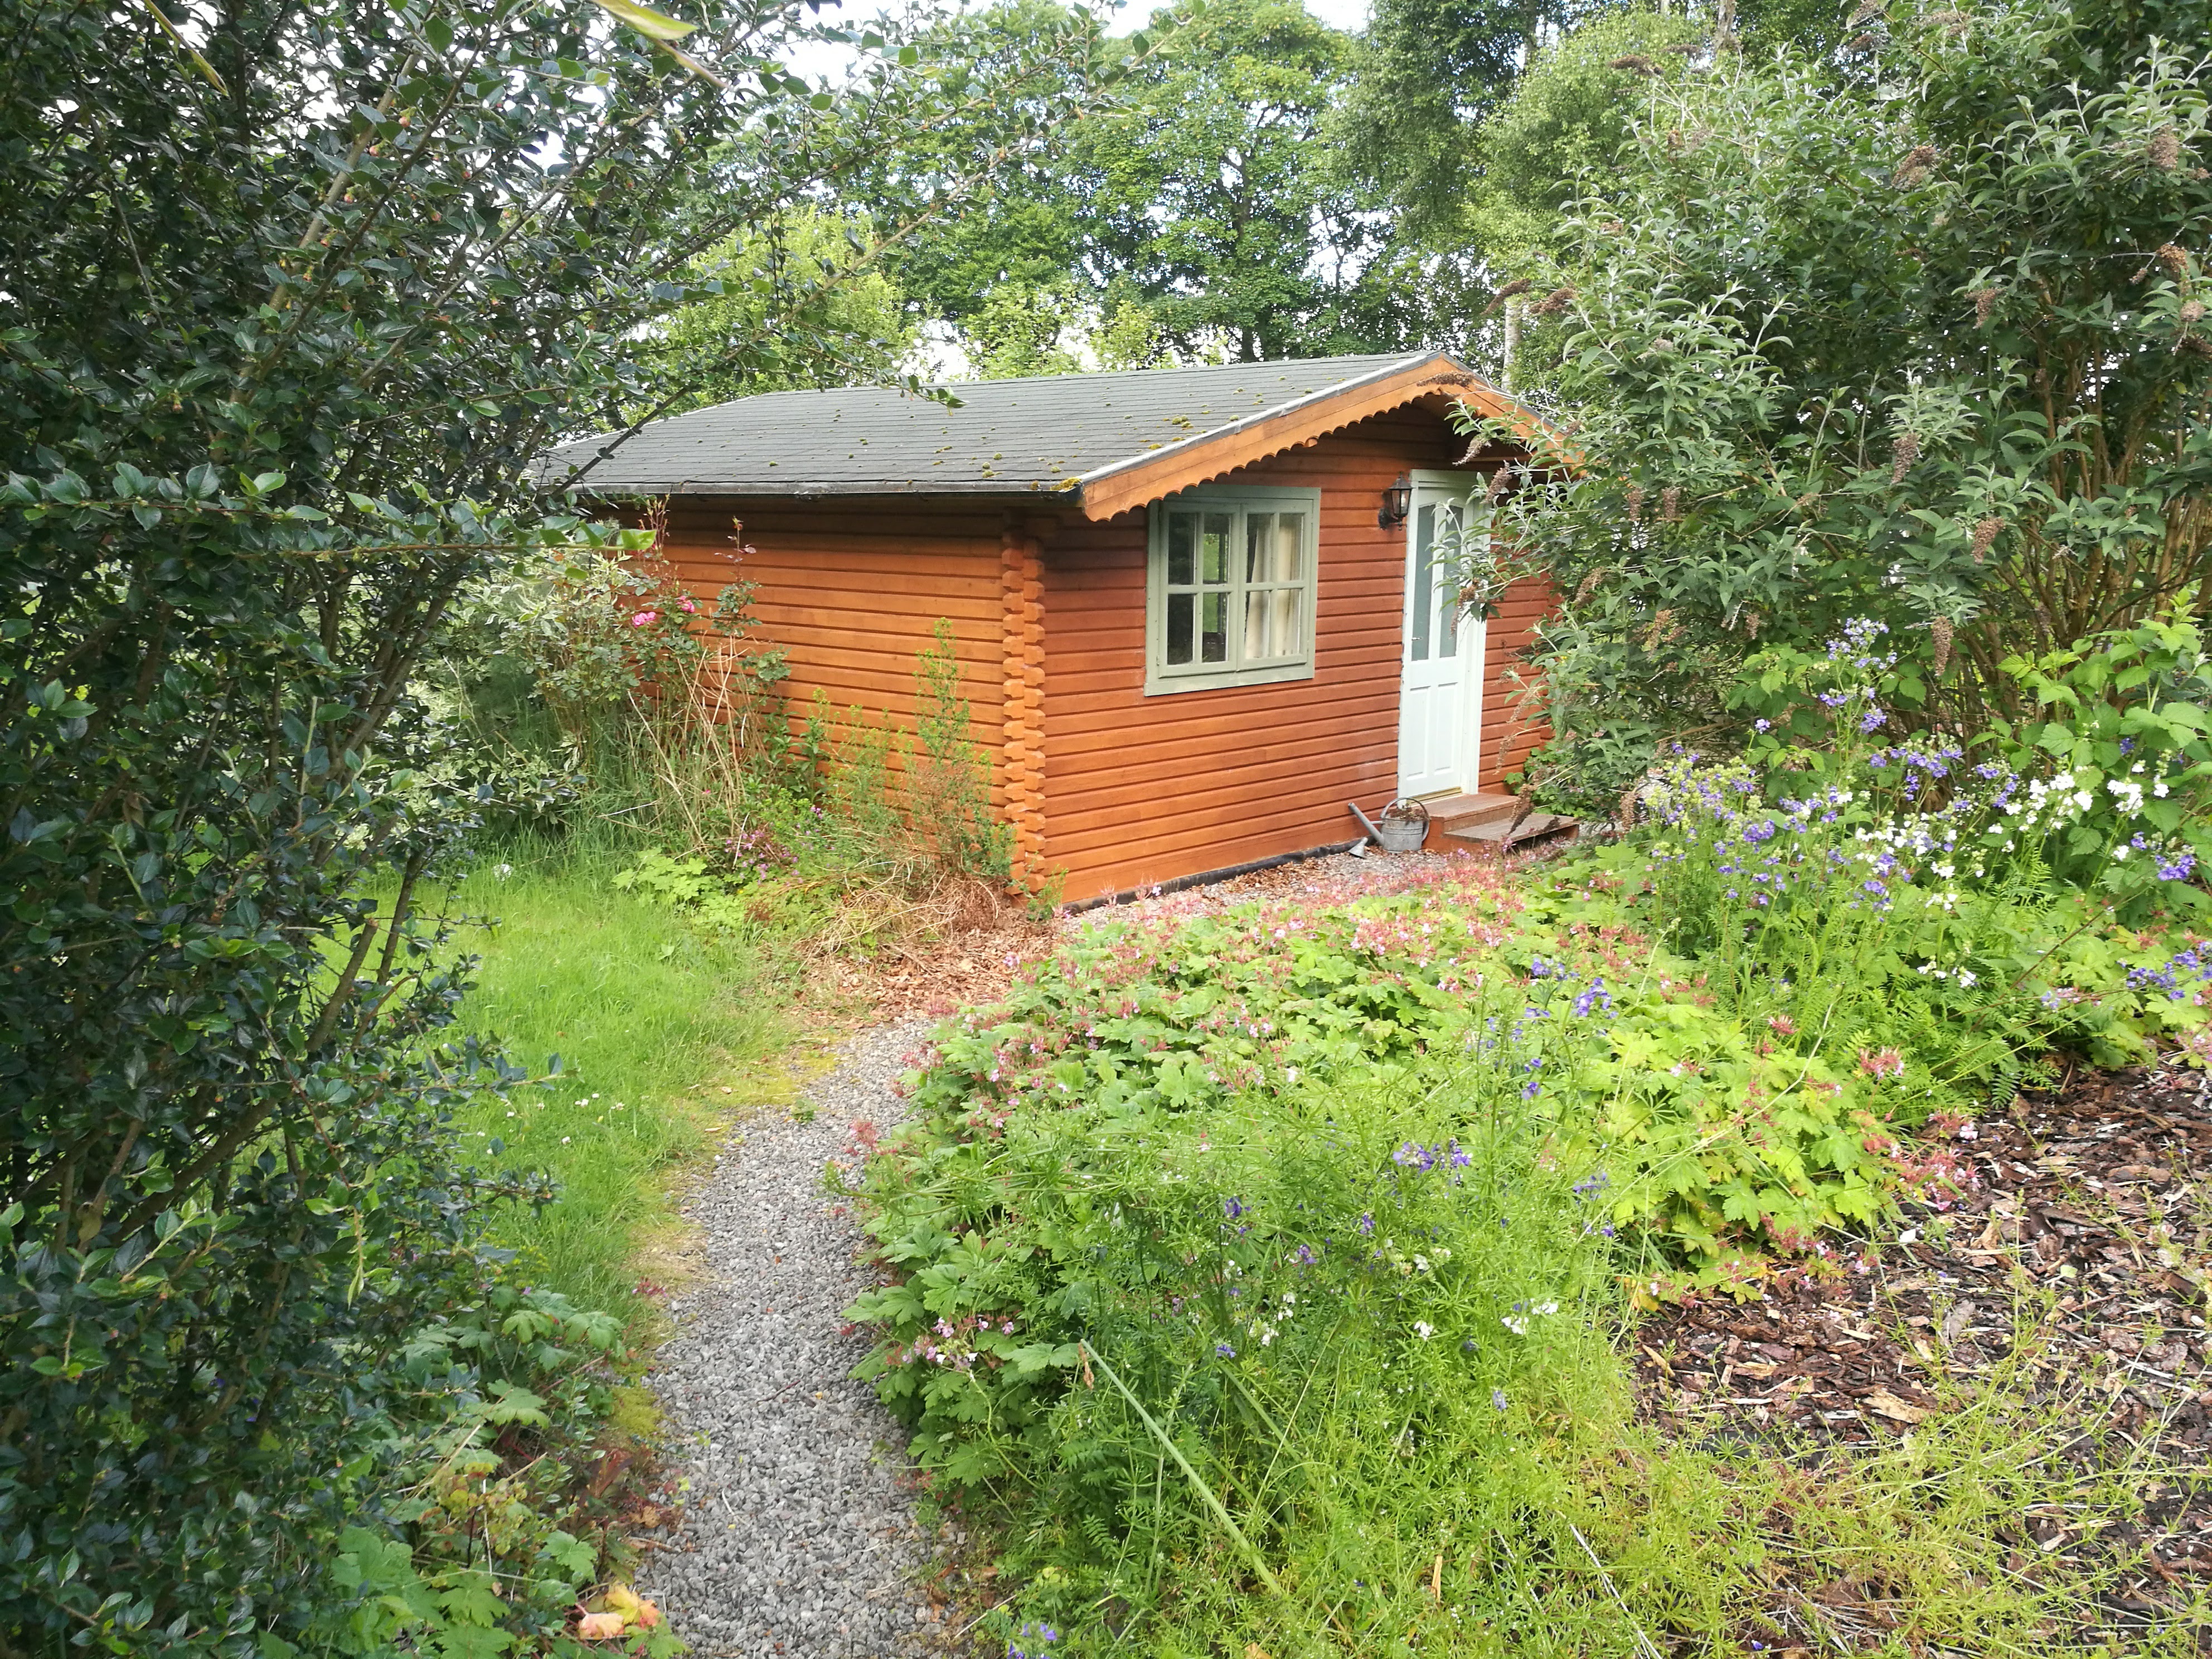 The Shed at Muir of Ord